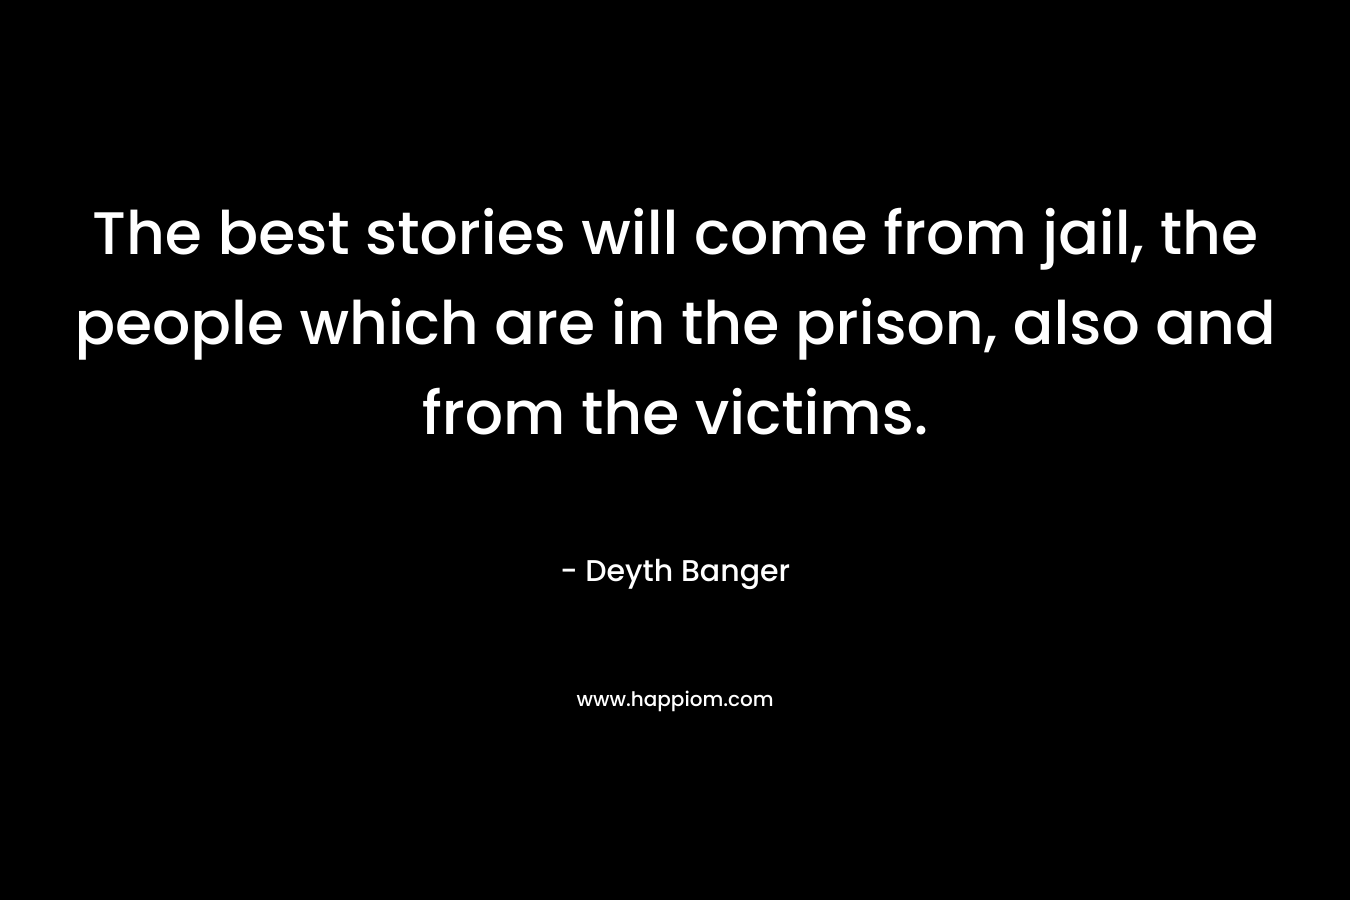 The best stories will come from jail, the people which are in the prison, also and from the victims. – Deyth Banger